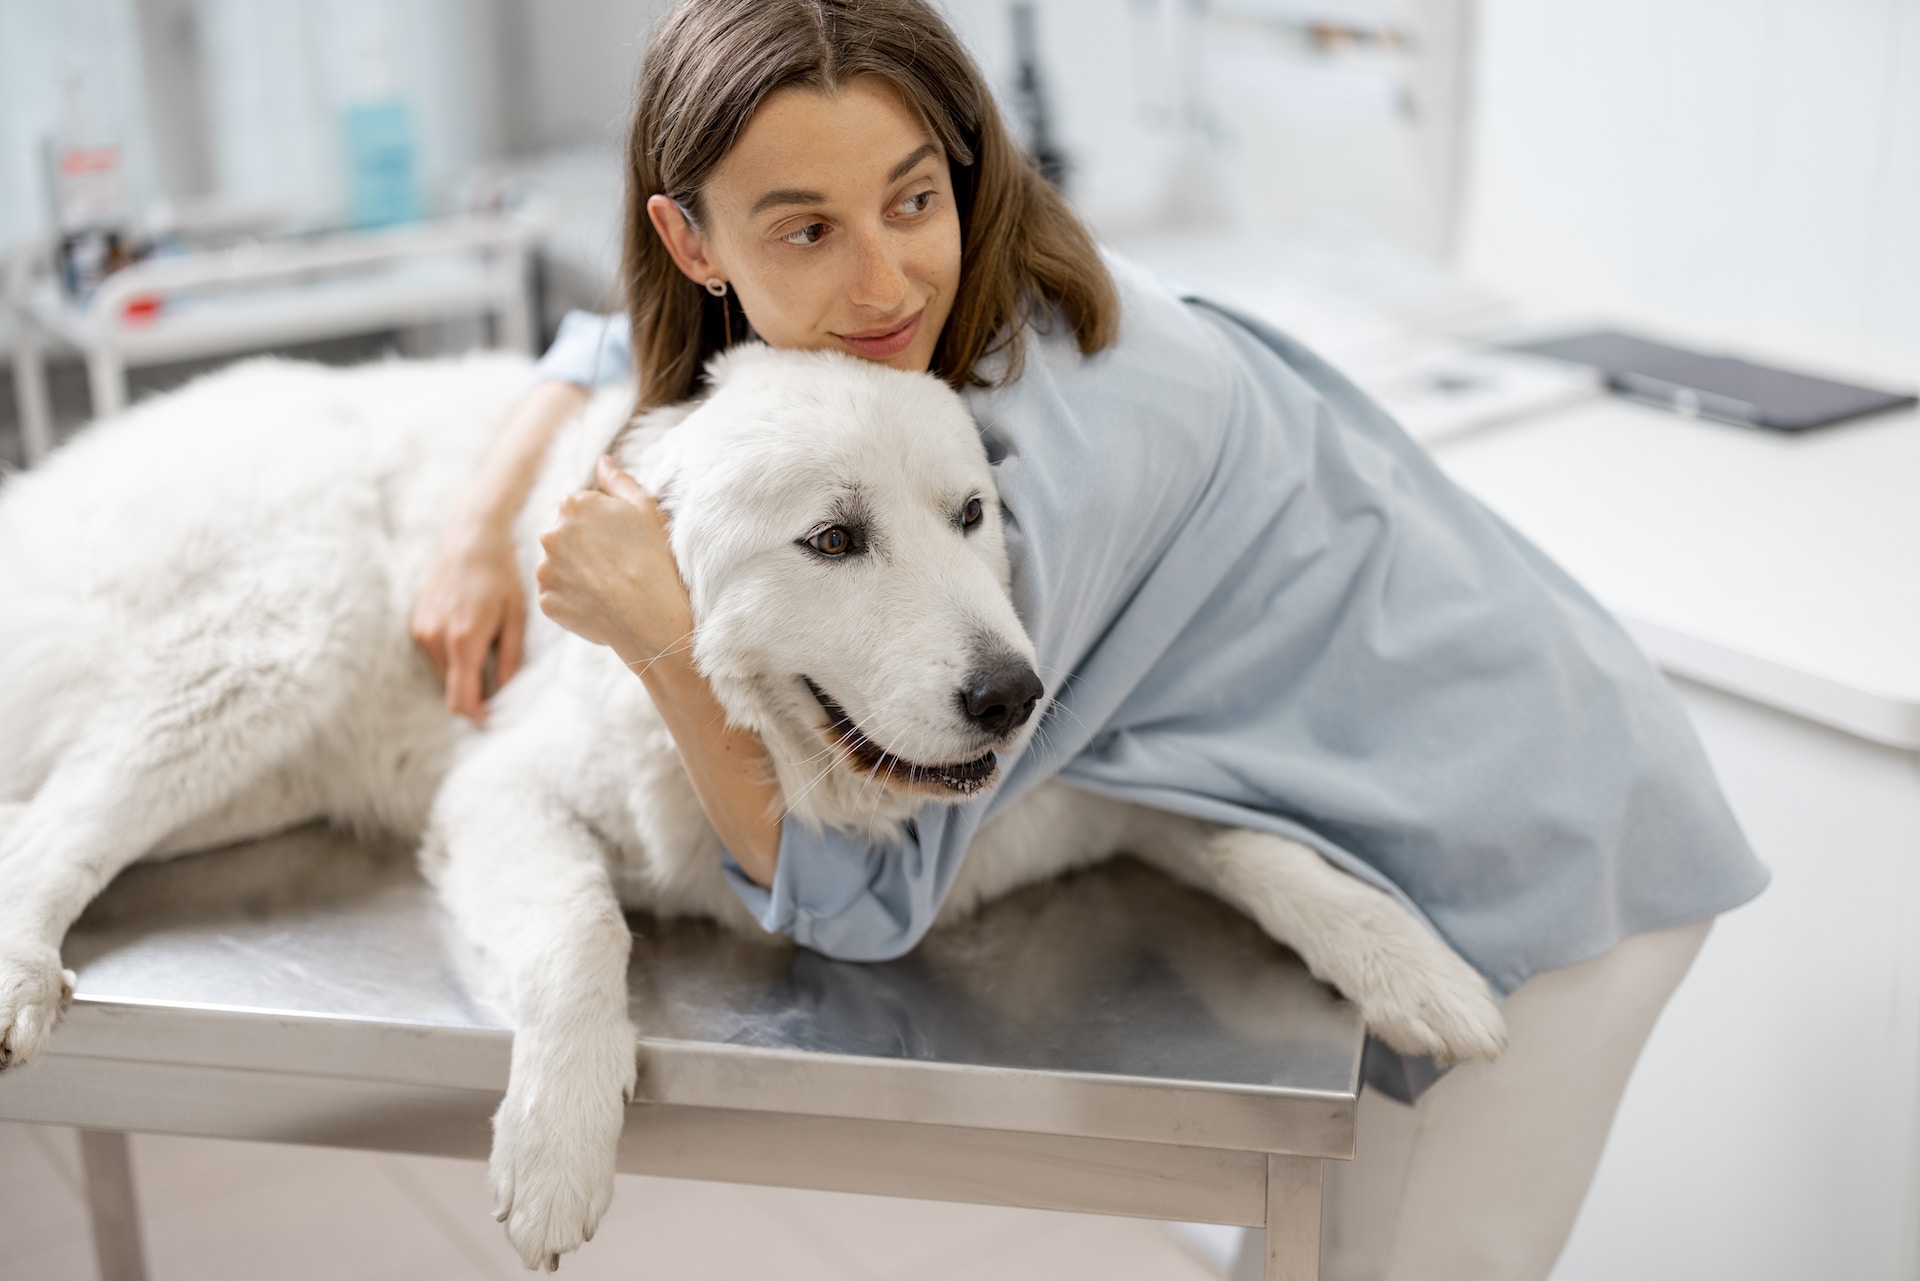 A woman hugging a dog at a vet's clinic